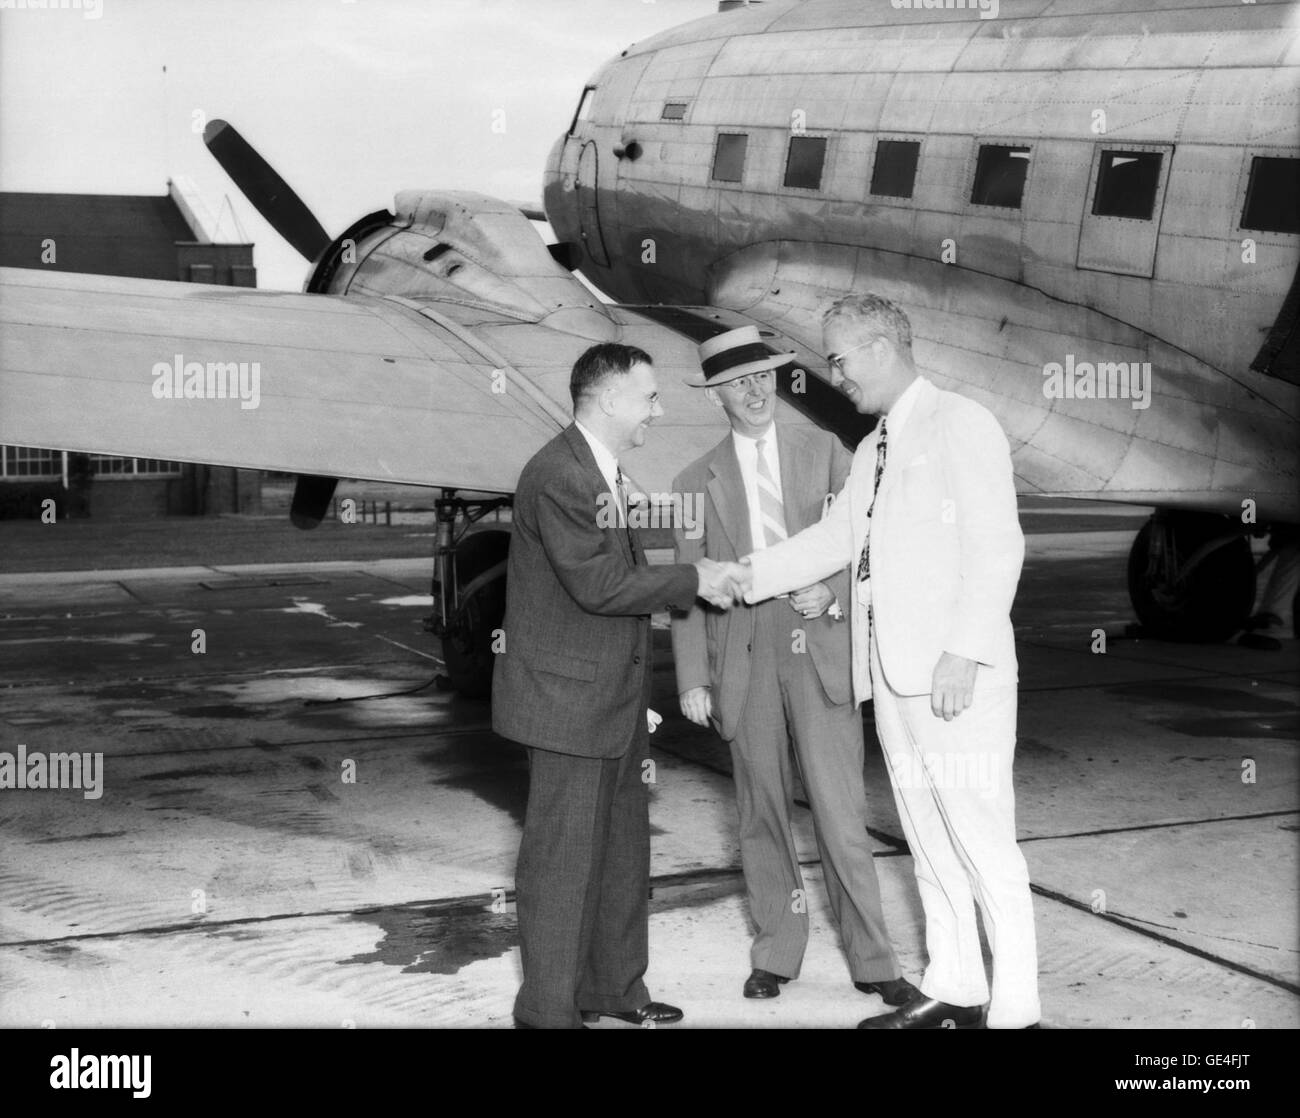 (September 8, 1947) Hugh L. Dryden (left), George Lewis's successor as the NACA's director of research, arrives with John F. Victory, the NACA's executive secretary, for a tour of the Langley Memorial Aeronautical Laboratory (LMAL). Welcoming Dryden and Victory is engineer-in-charge Henry Reid.  Image # : L-54384 Stock Photo